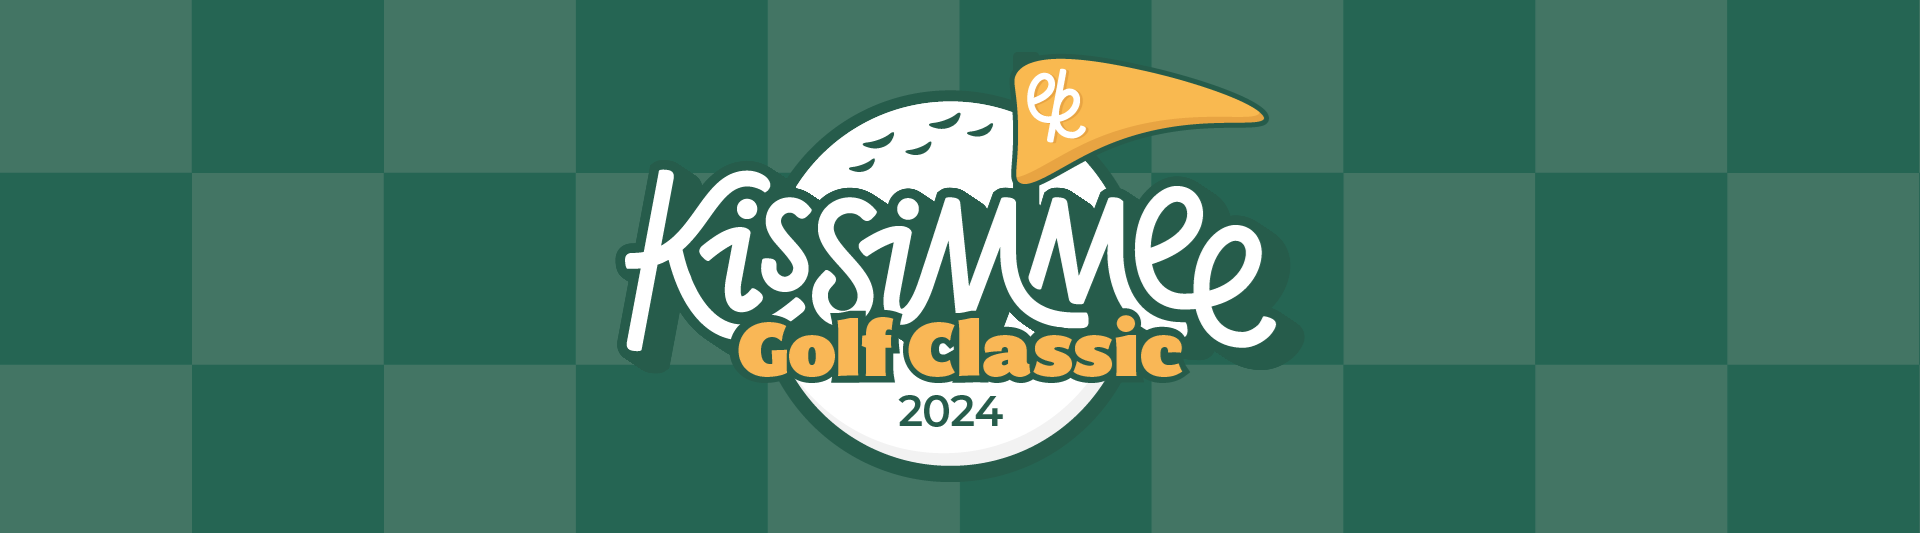 Kissimmee Golf Classic 2024 - Players